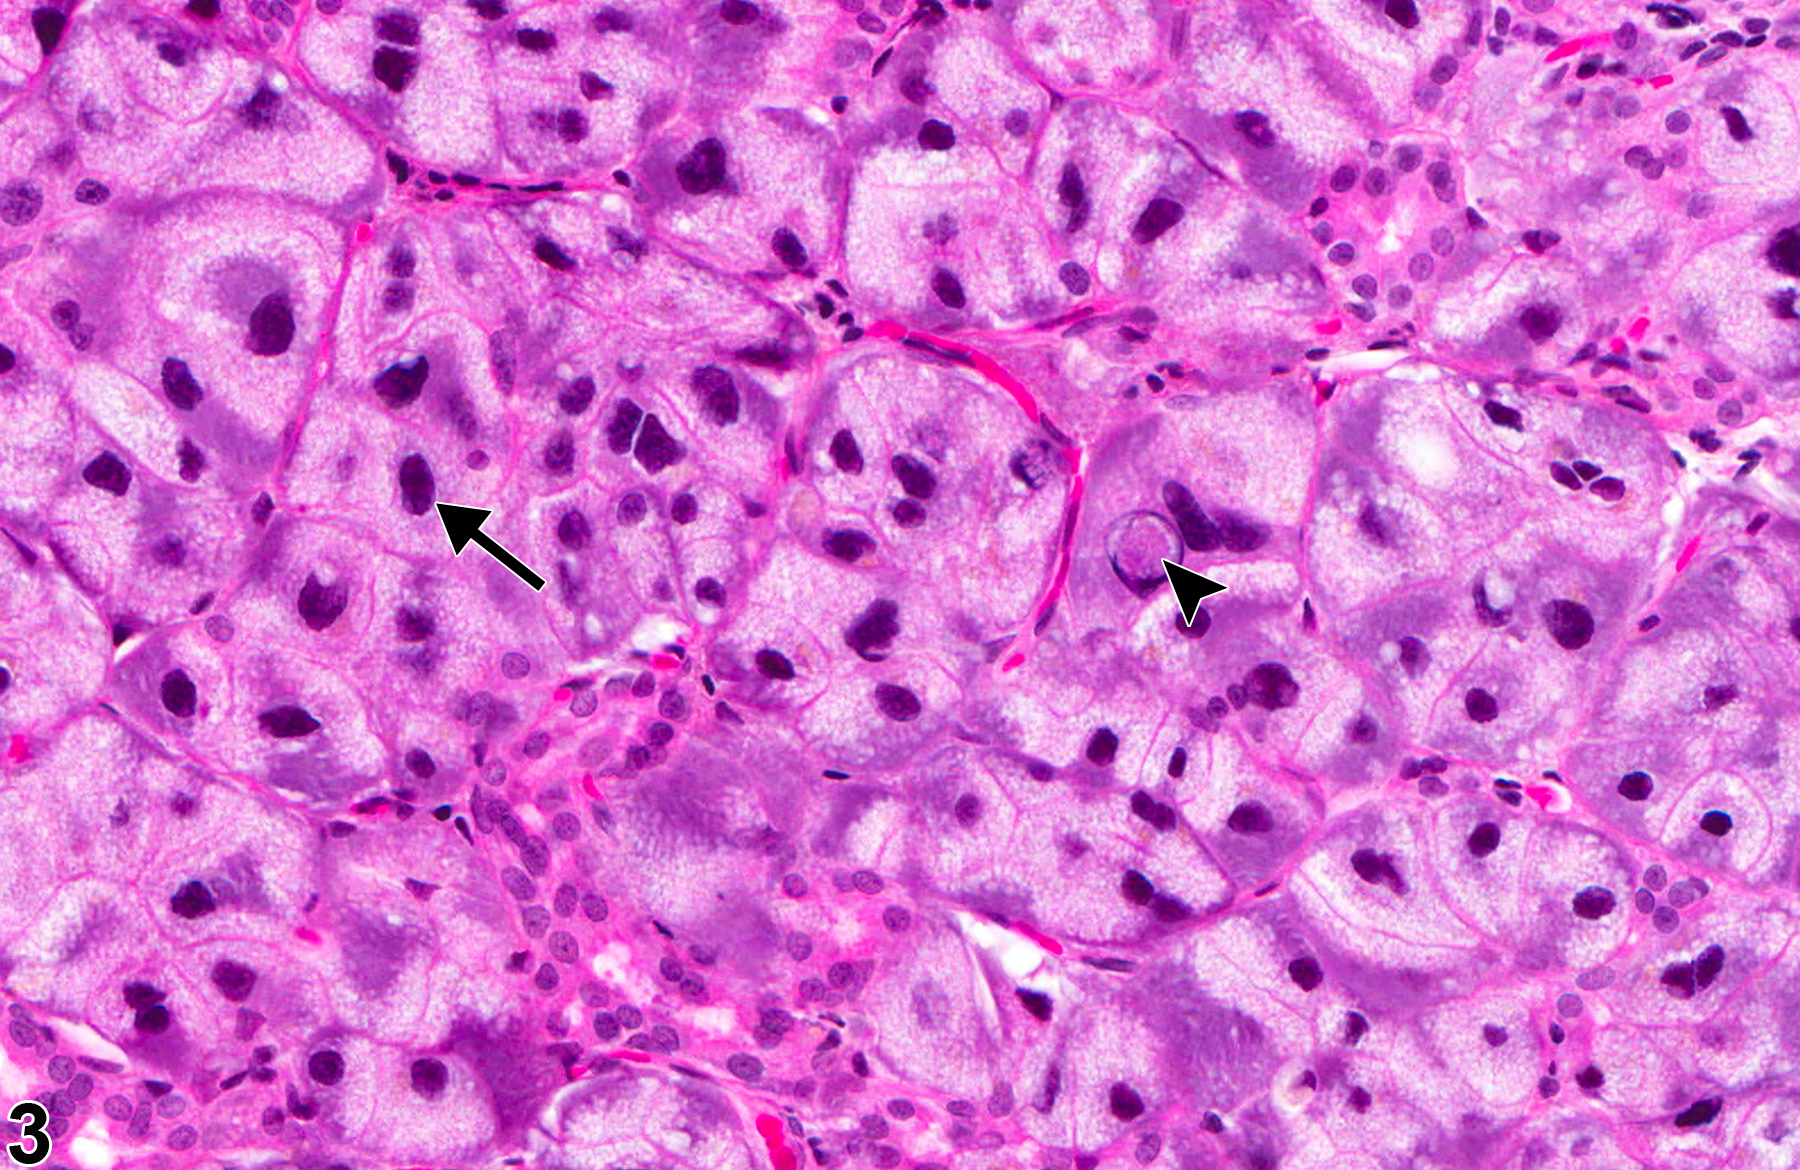 Image of karyomegaly in the lacrimal gland from a male Osborne Mendel rat in a chronic study